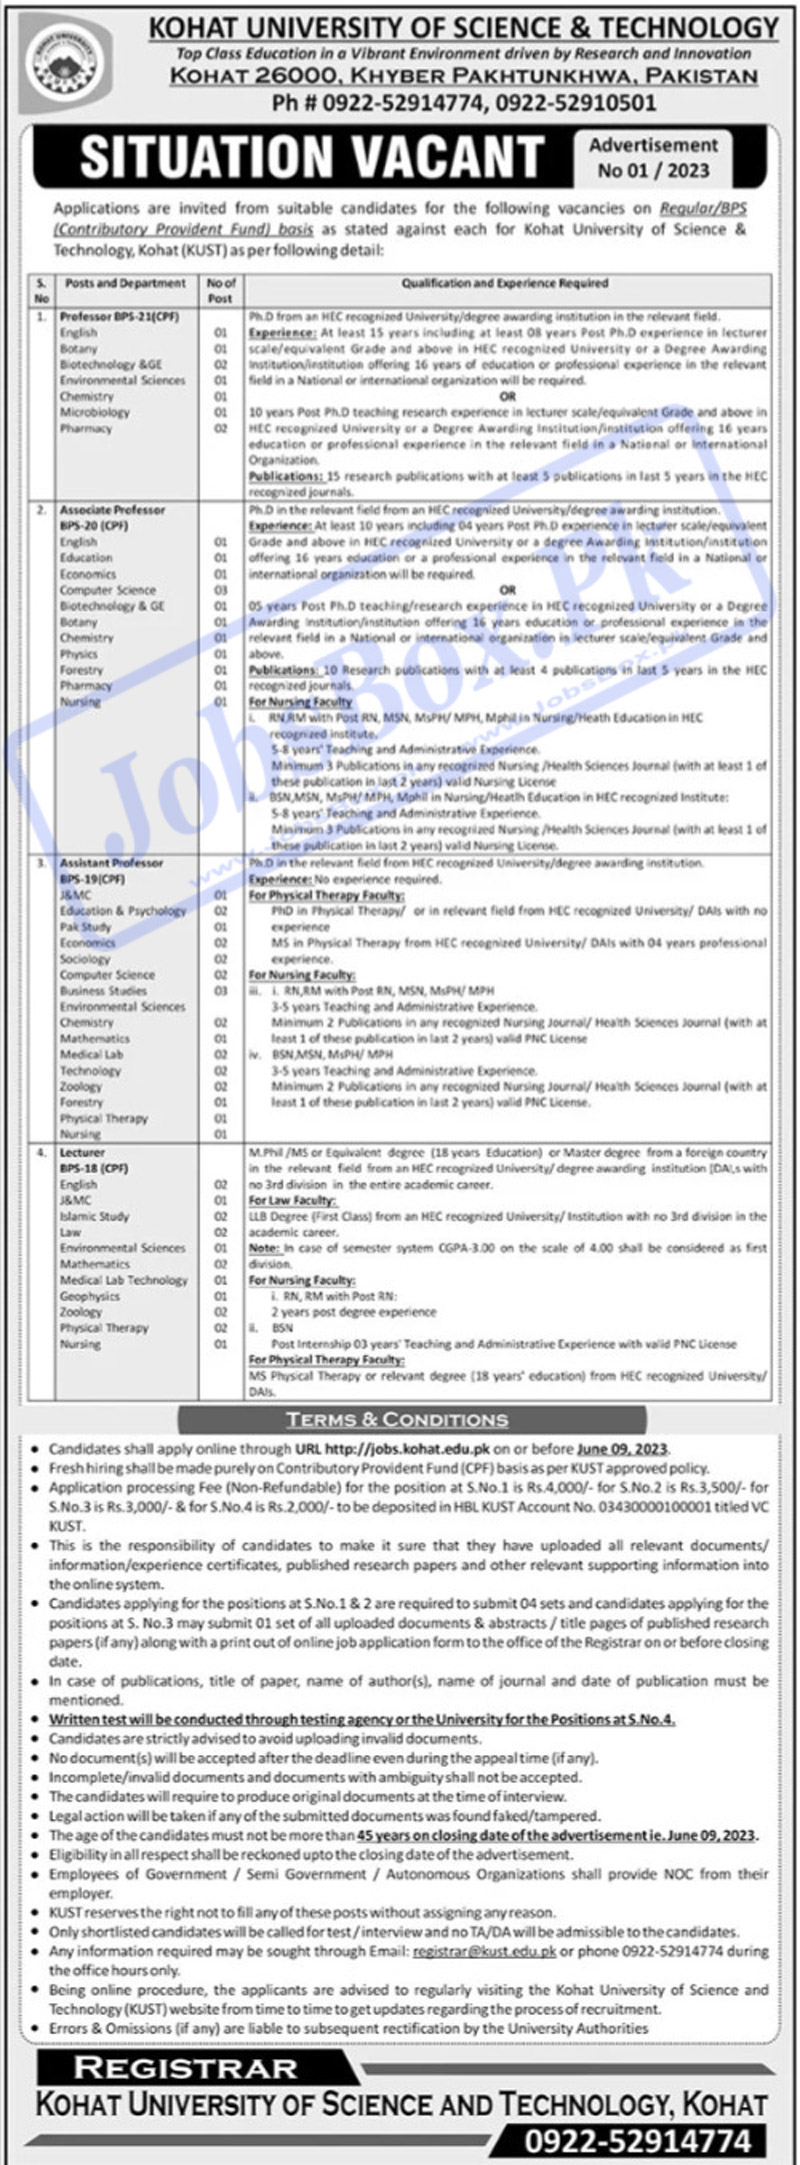 Kohat University of Science and Technology KUST Jobs 2023